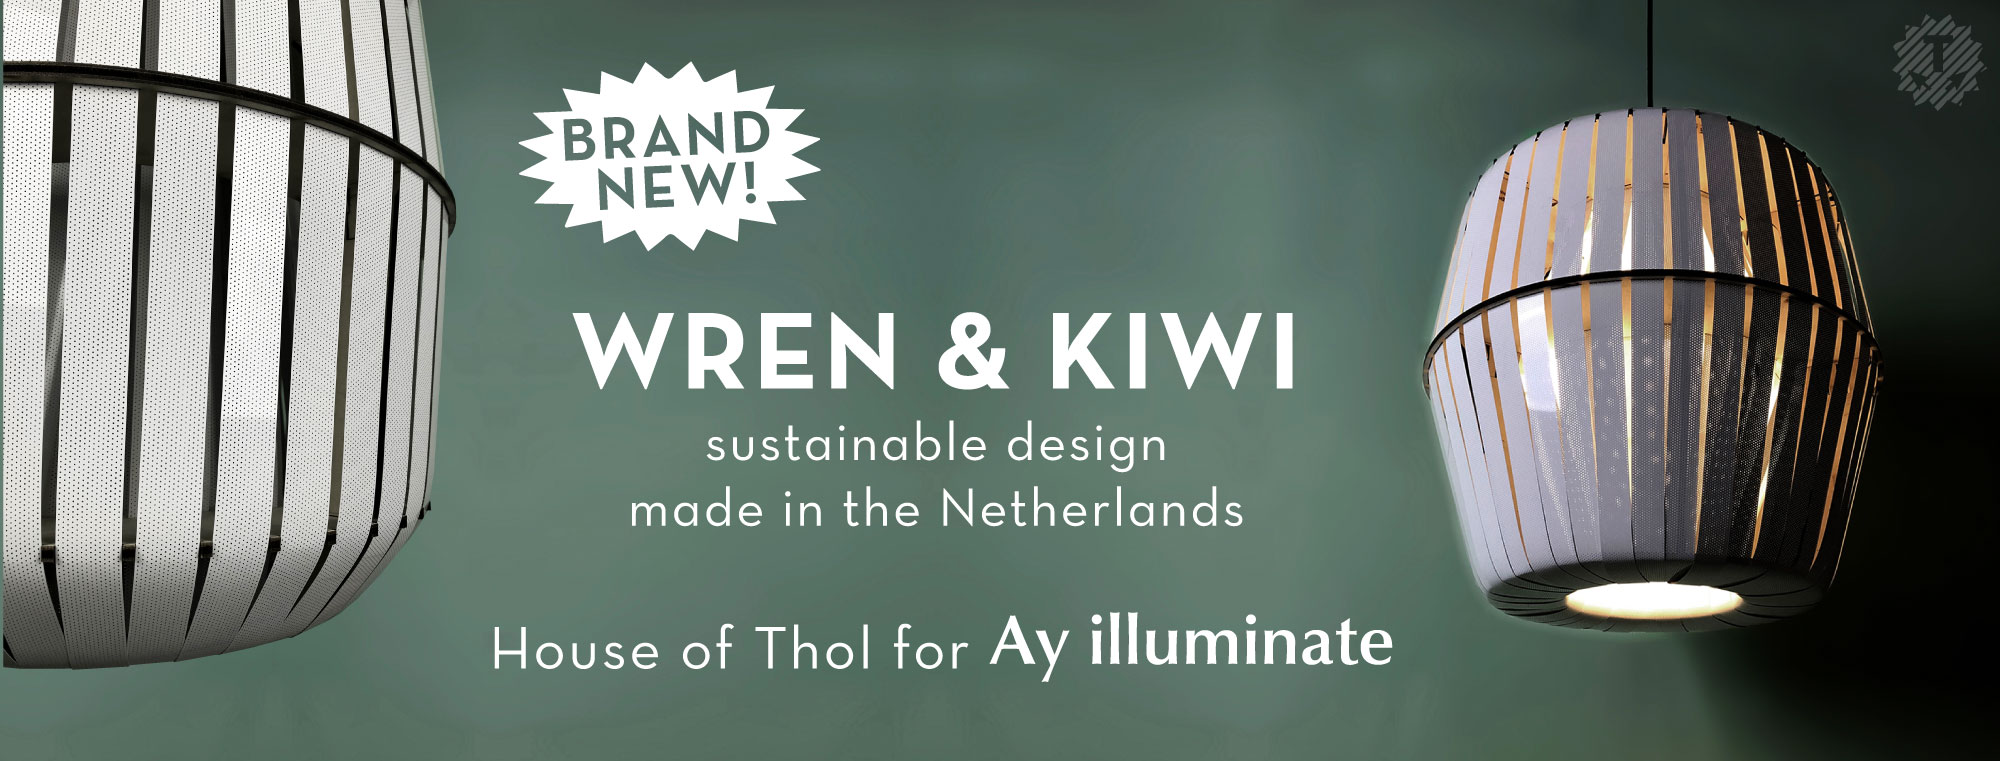 Brand New | WREN & KIWI | sustainable design made in the Netherlands | House of Thol for Ay Illuminate